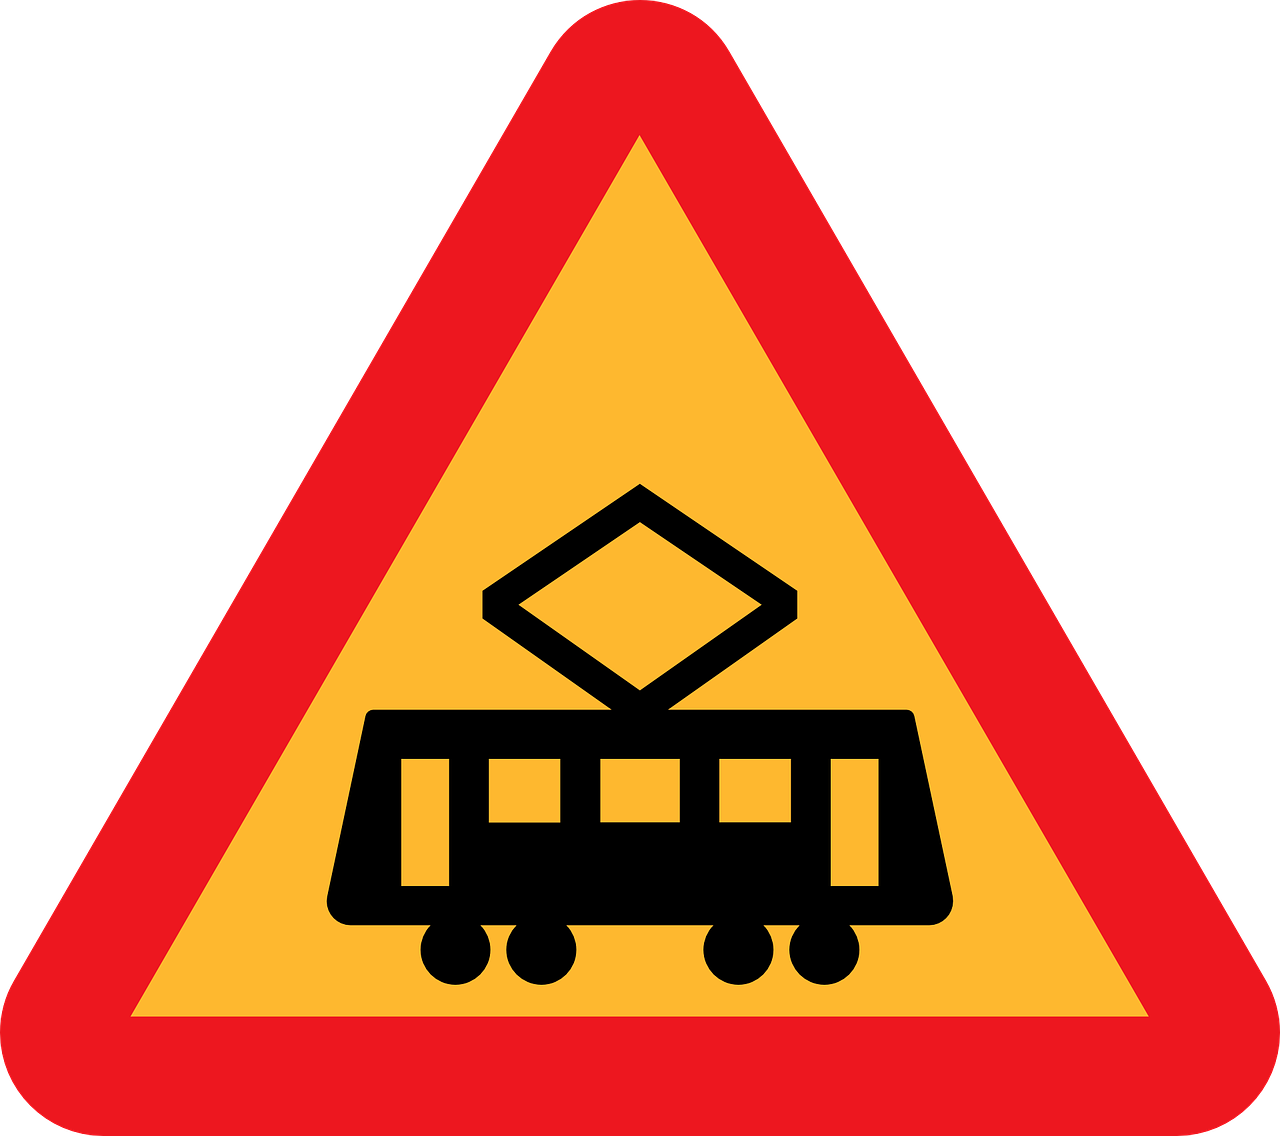 tram crossing,street car crossing,trolley crossing,caution sign,warning sign,roadsign,road sign,highway sign,free vector graphics,free pictures, free photos, free images, royalty free, free illustrations, public domain